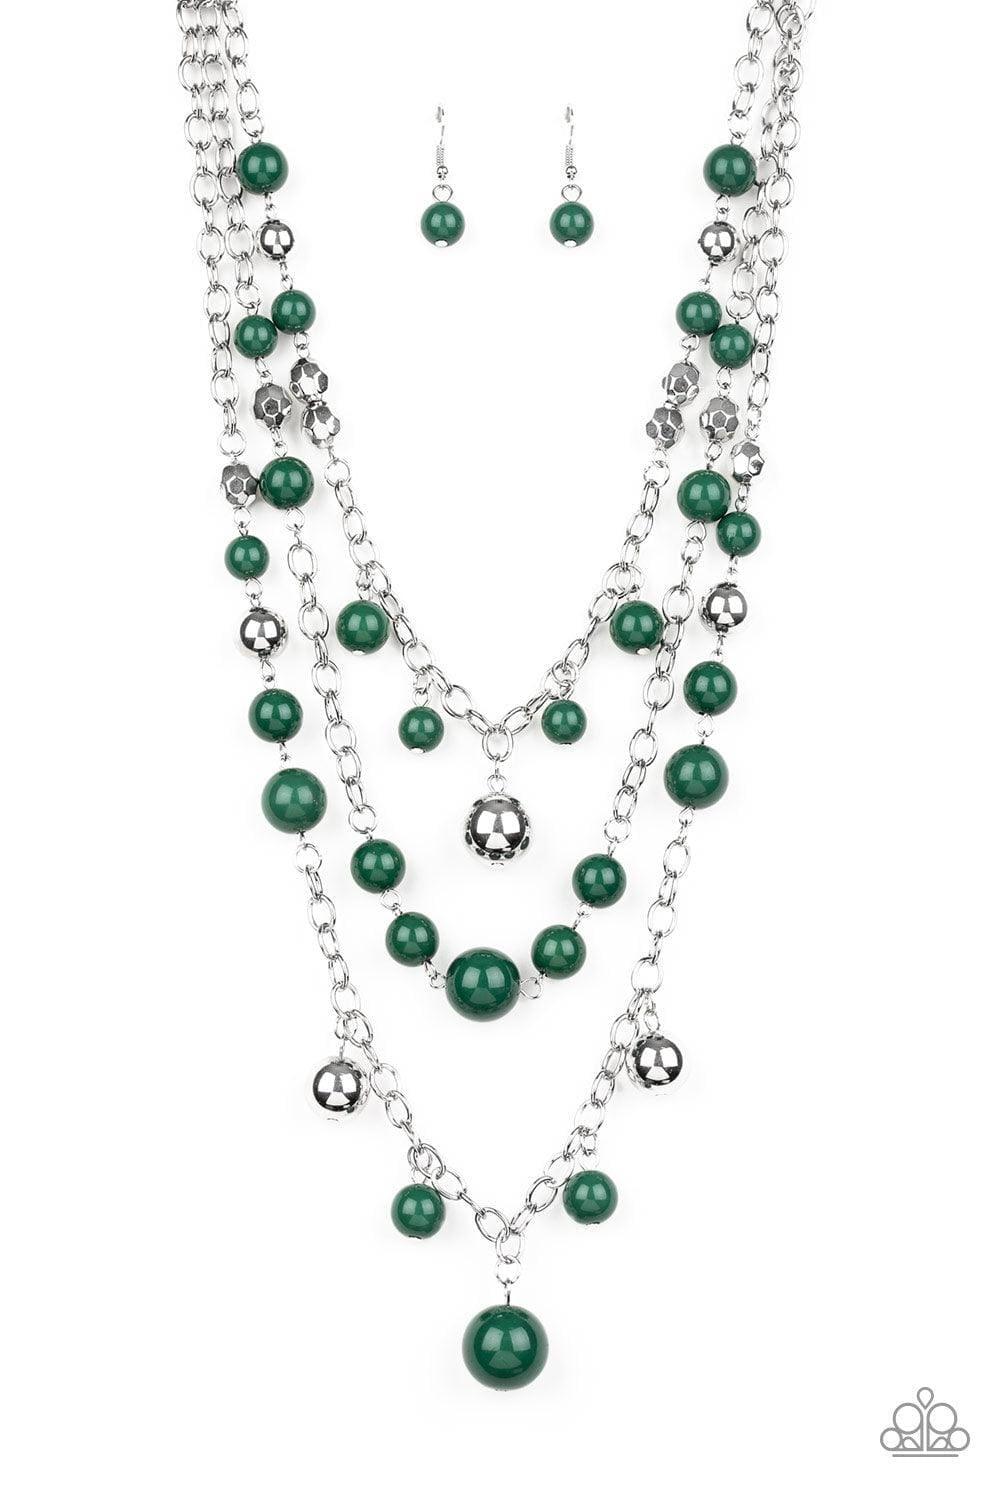 Paparazzi Accessories - The Partygoer - Green Necklace - Bling by JessieK